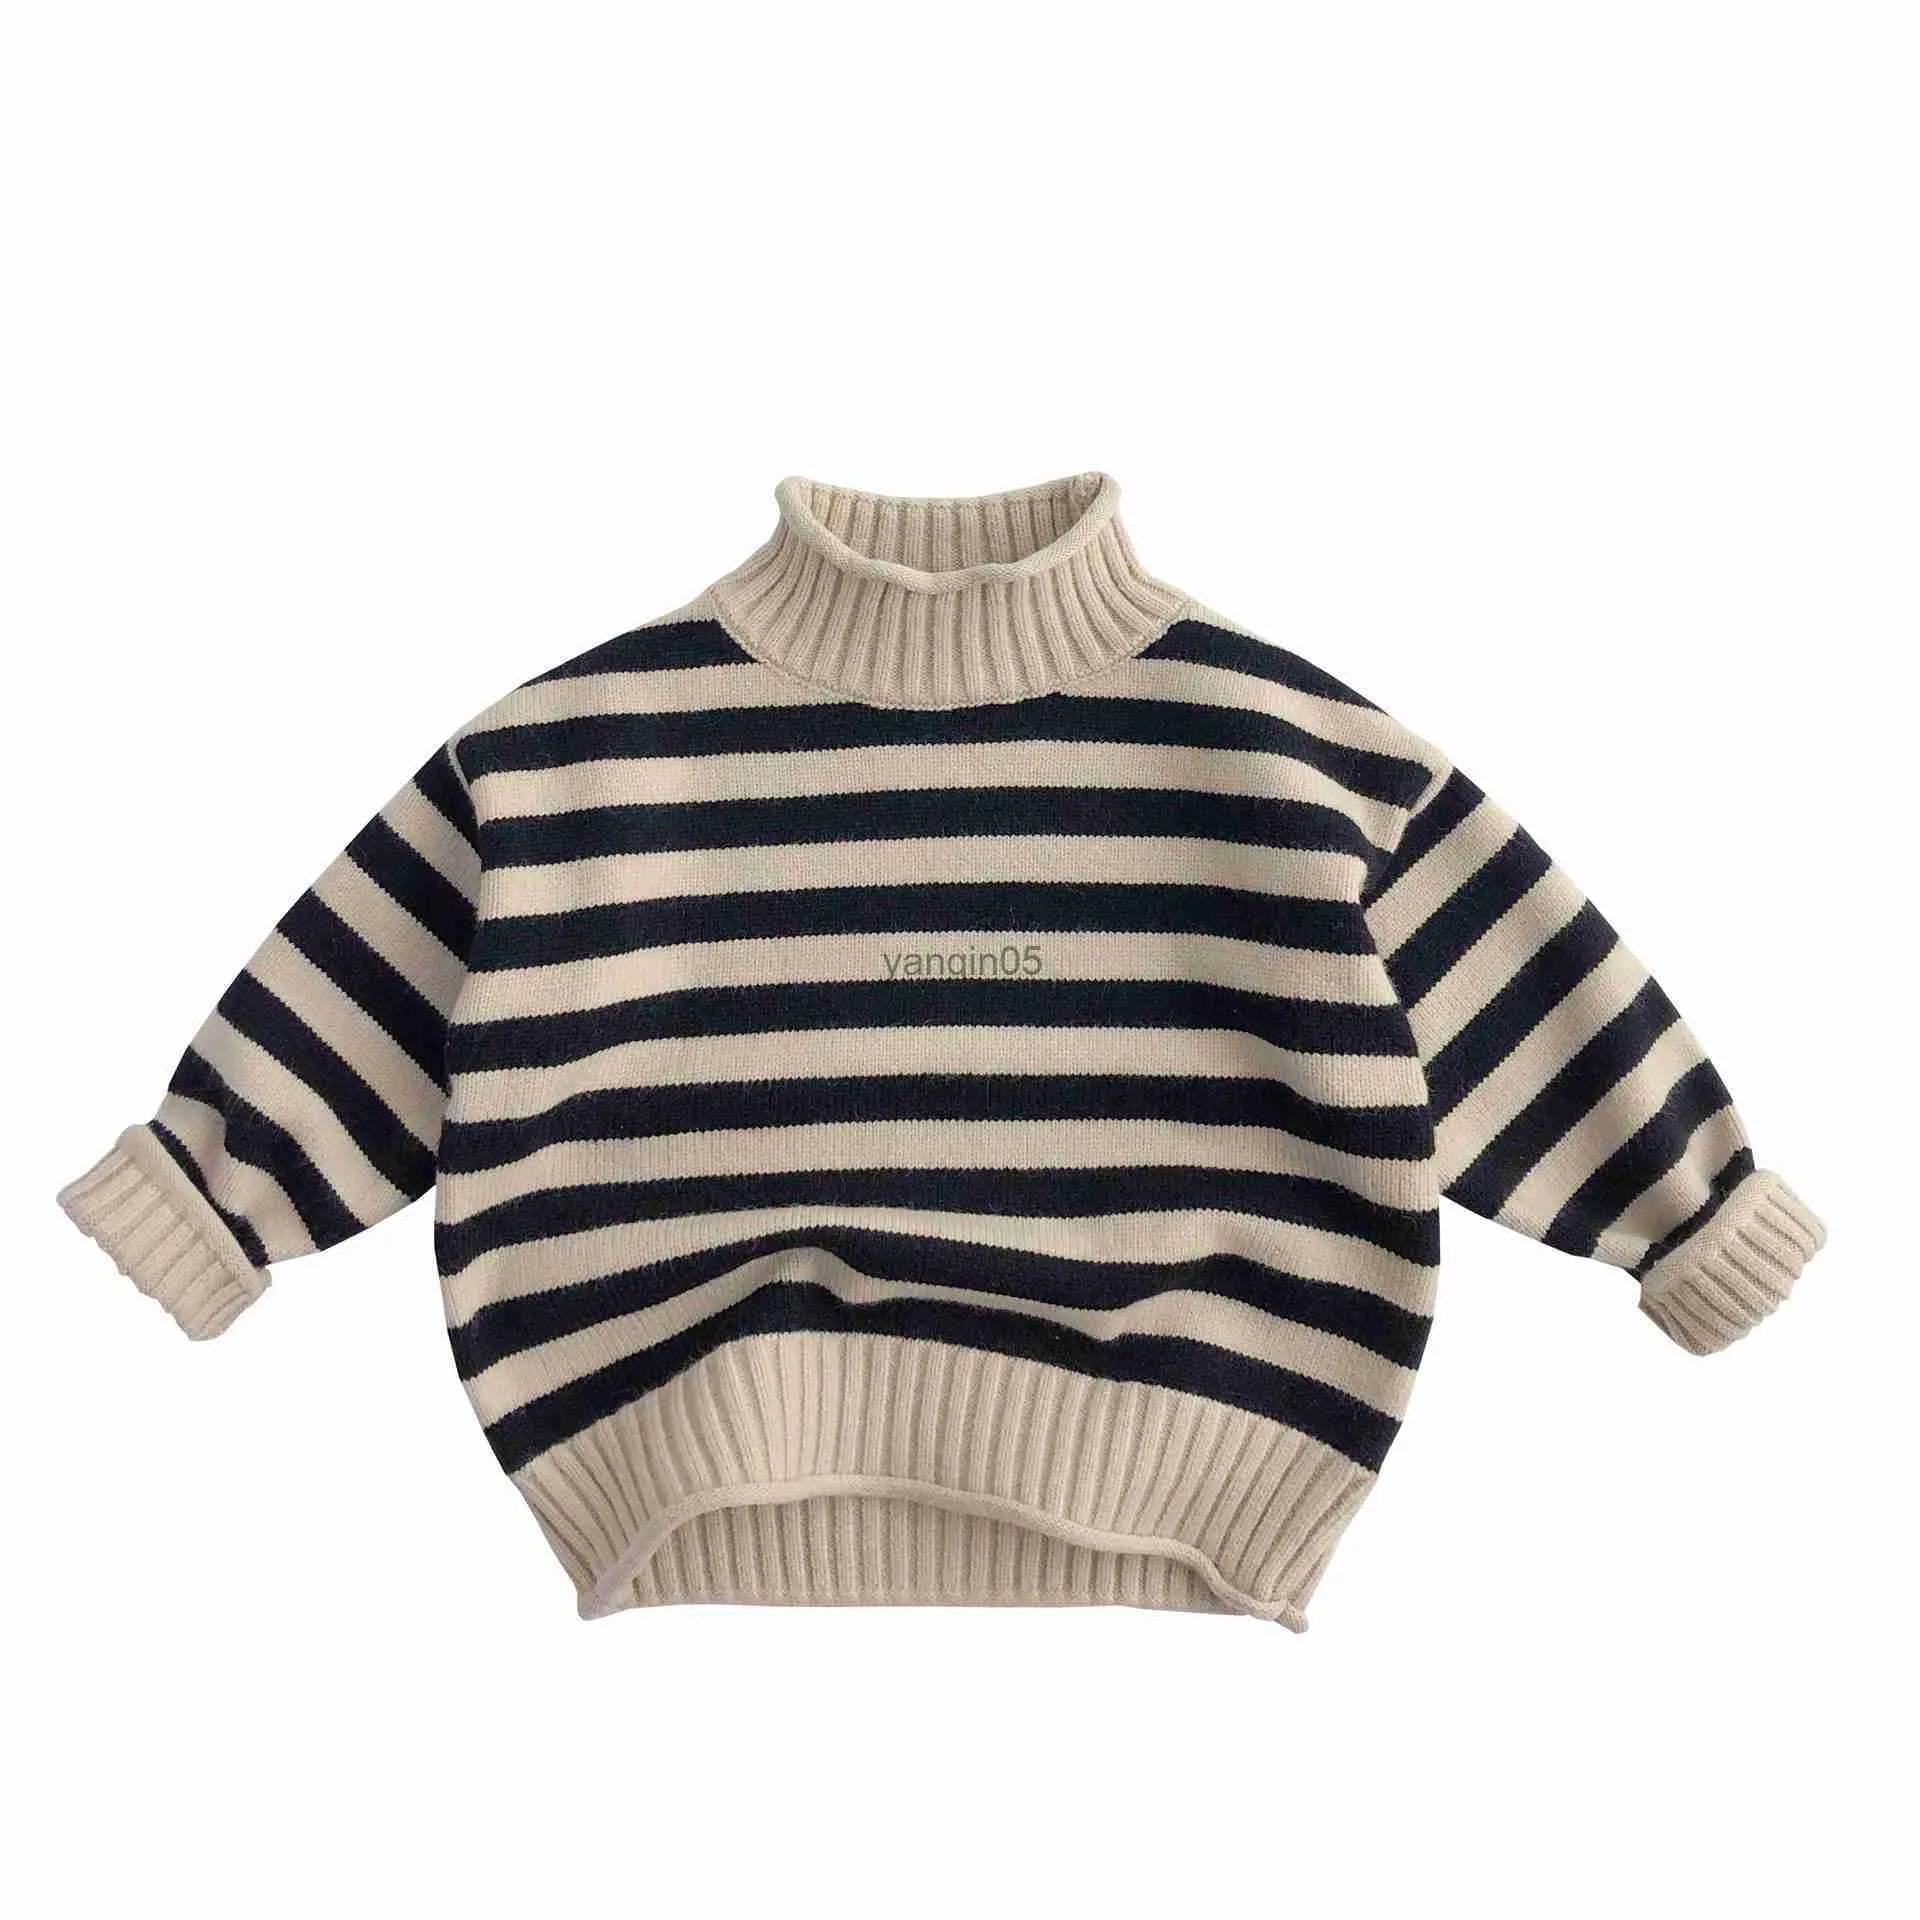 Pullover Winter Toddler Baby Girls Boys Striped Rolled Turtleneck Knitted Sweater Coat Child Knitwear Pullover Kids Outfit Tops 1-8 Years HKD230719